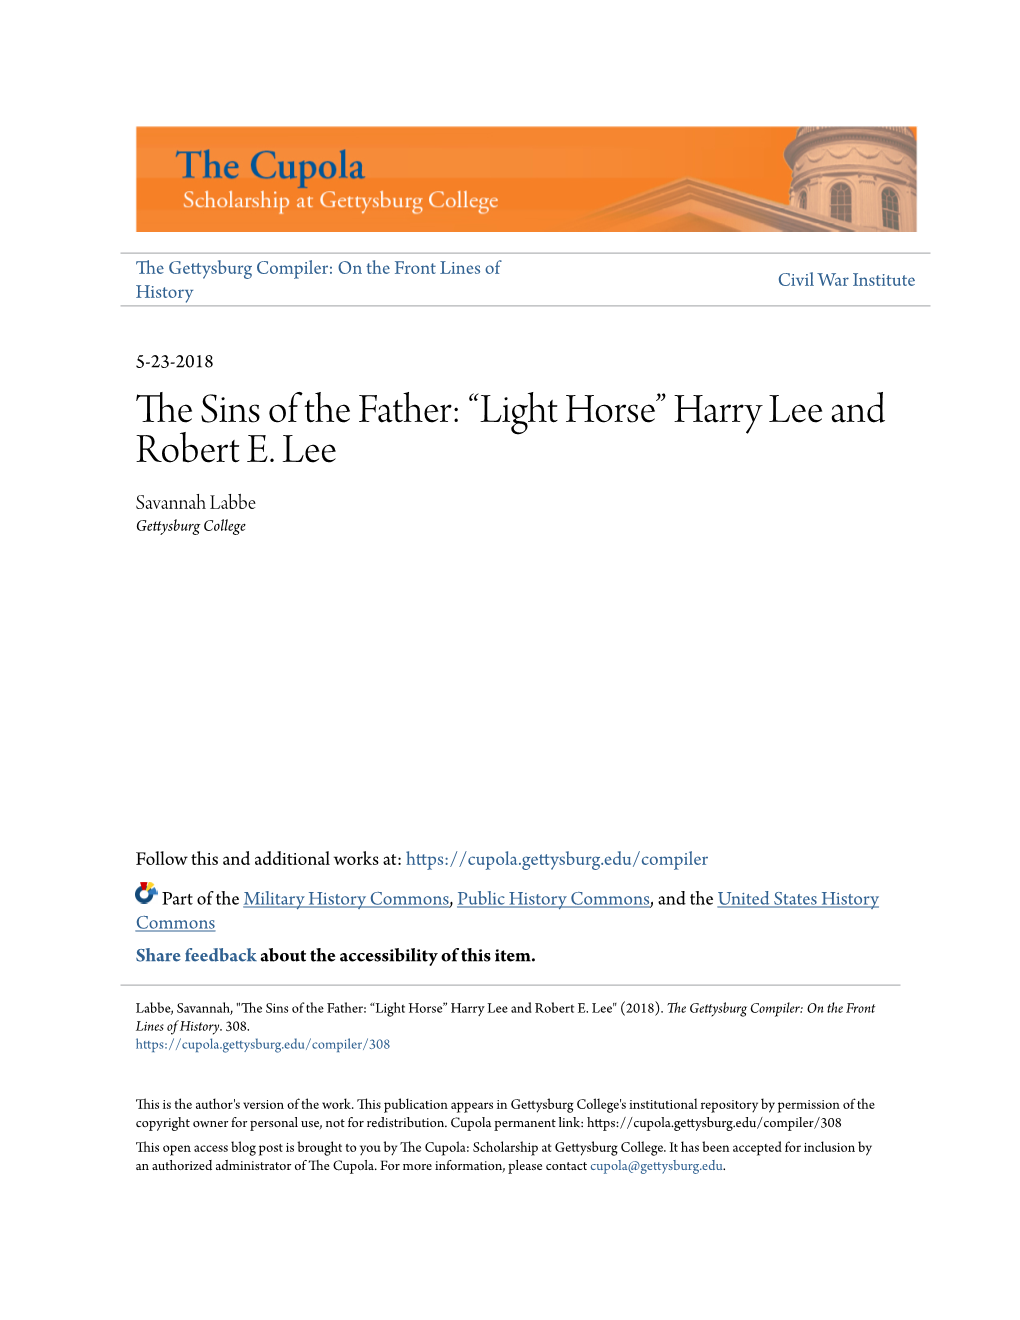 The Sins of the Father: “Light Horse” Harry Lee and Robert E. Lee